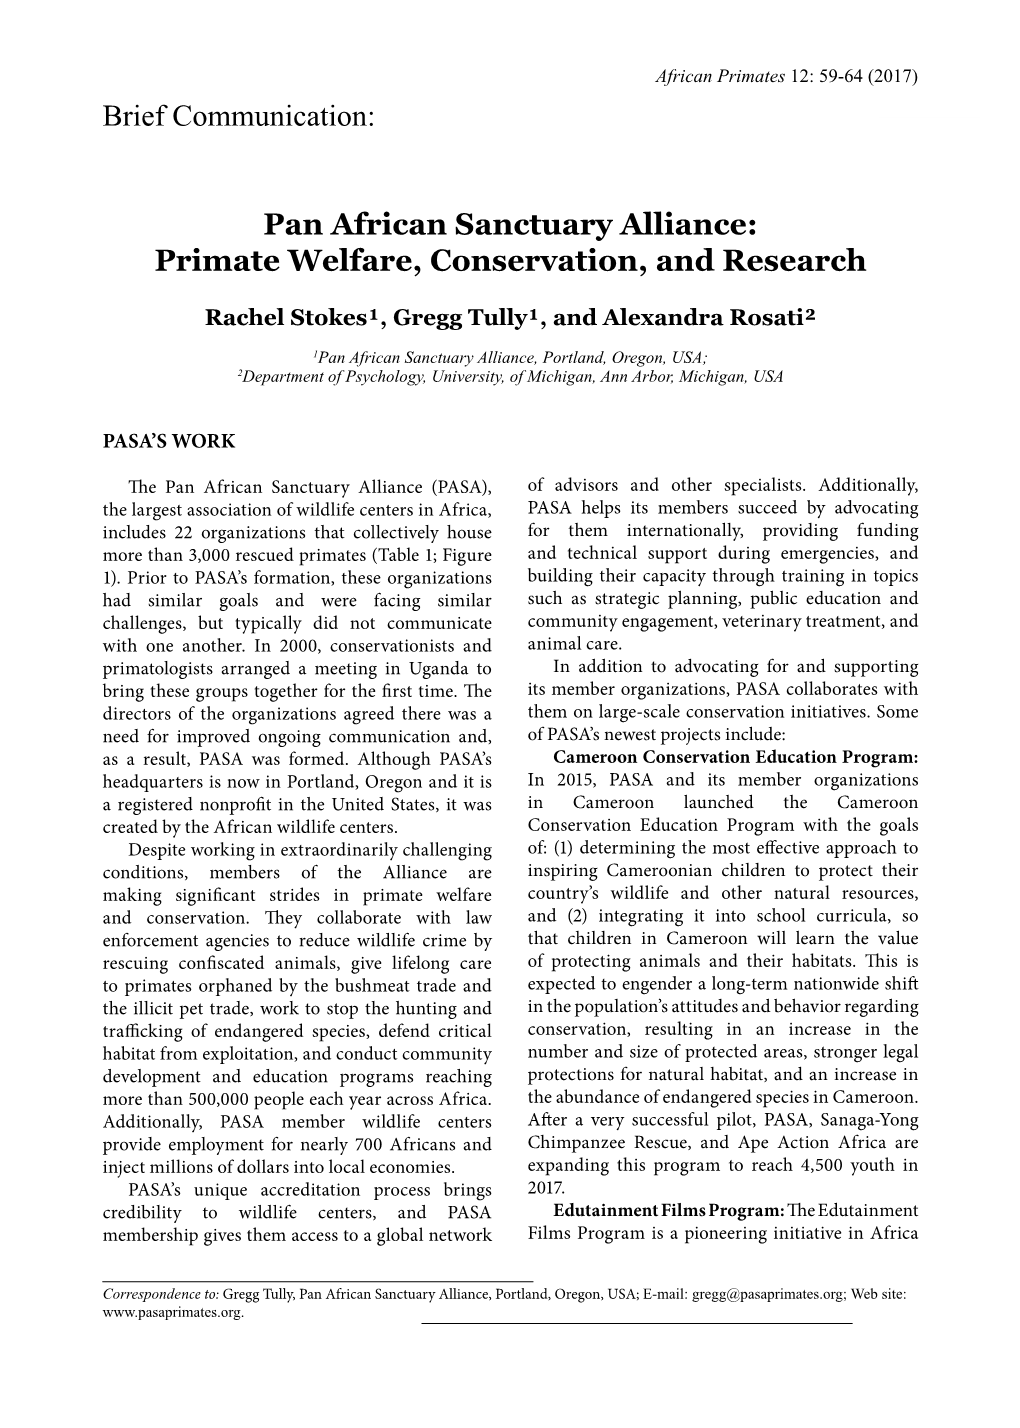 Pan African Sanctuary Alliance: Primate Welfare, Conservation, and Research